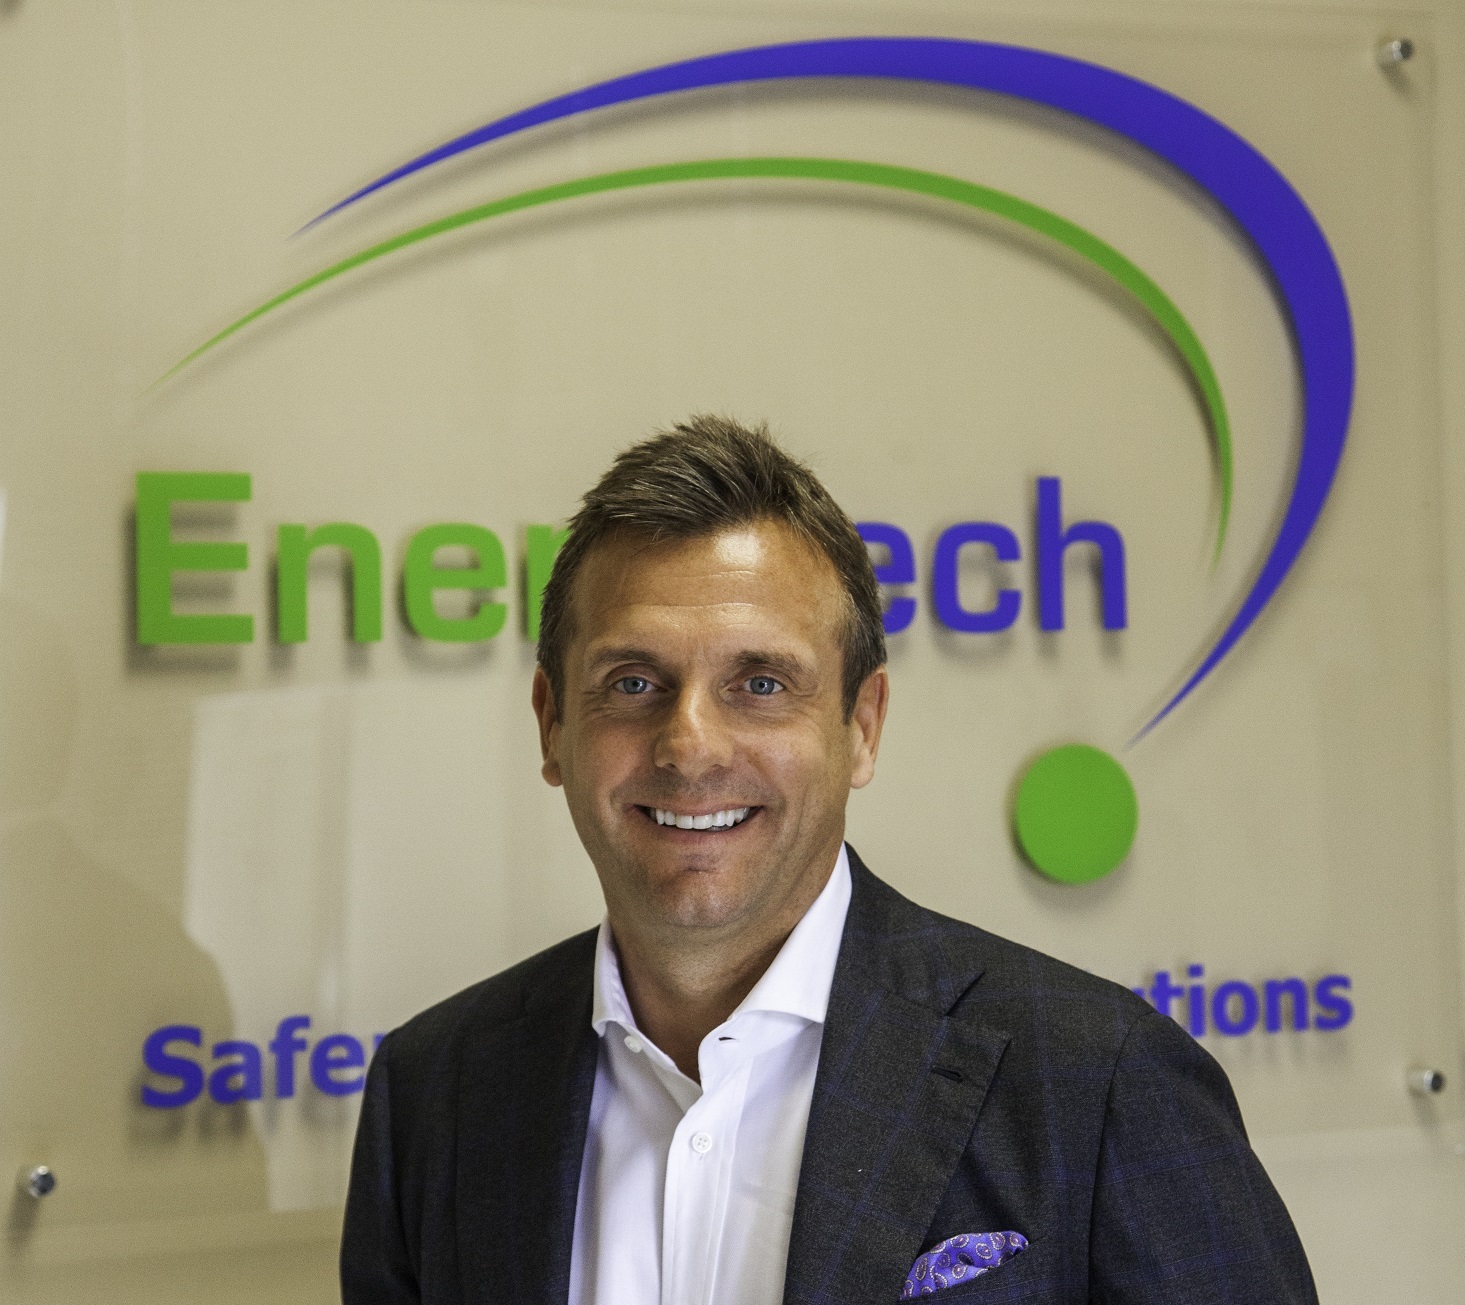 EnerMech appoints Christian Brown as chief executive officer